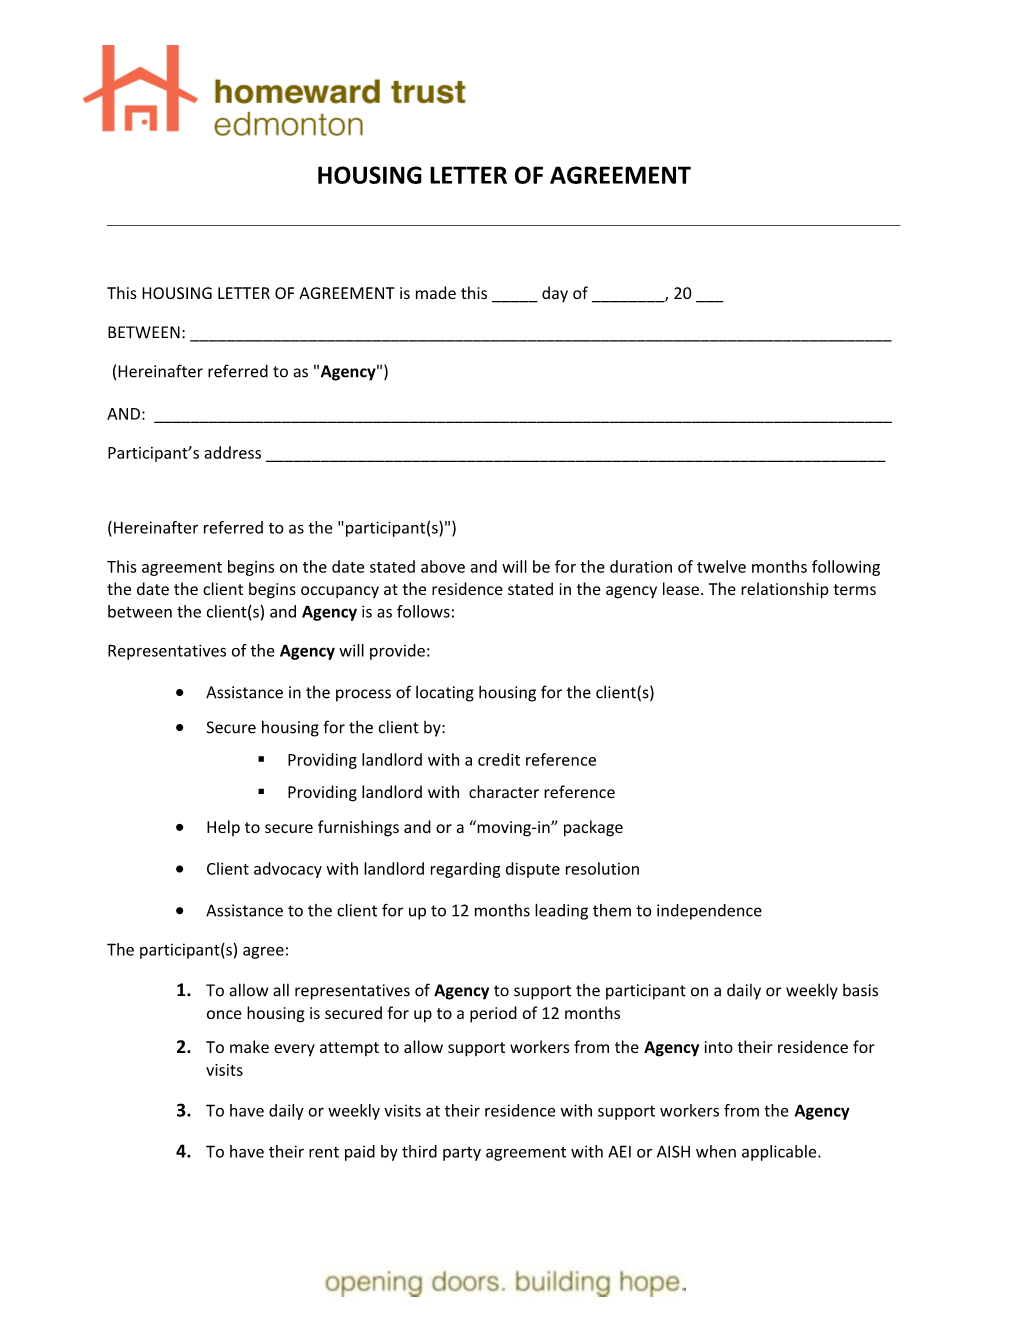 This HOUSING LETTER of AGREEMENT Is Made This _____ Day of ______, 2008